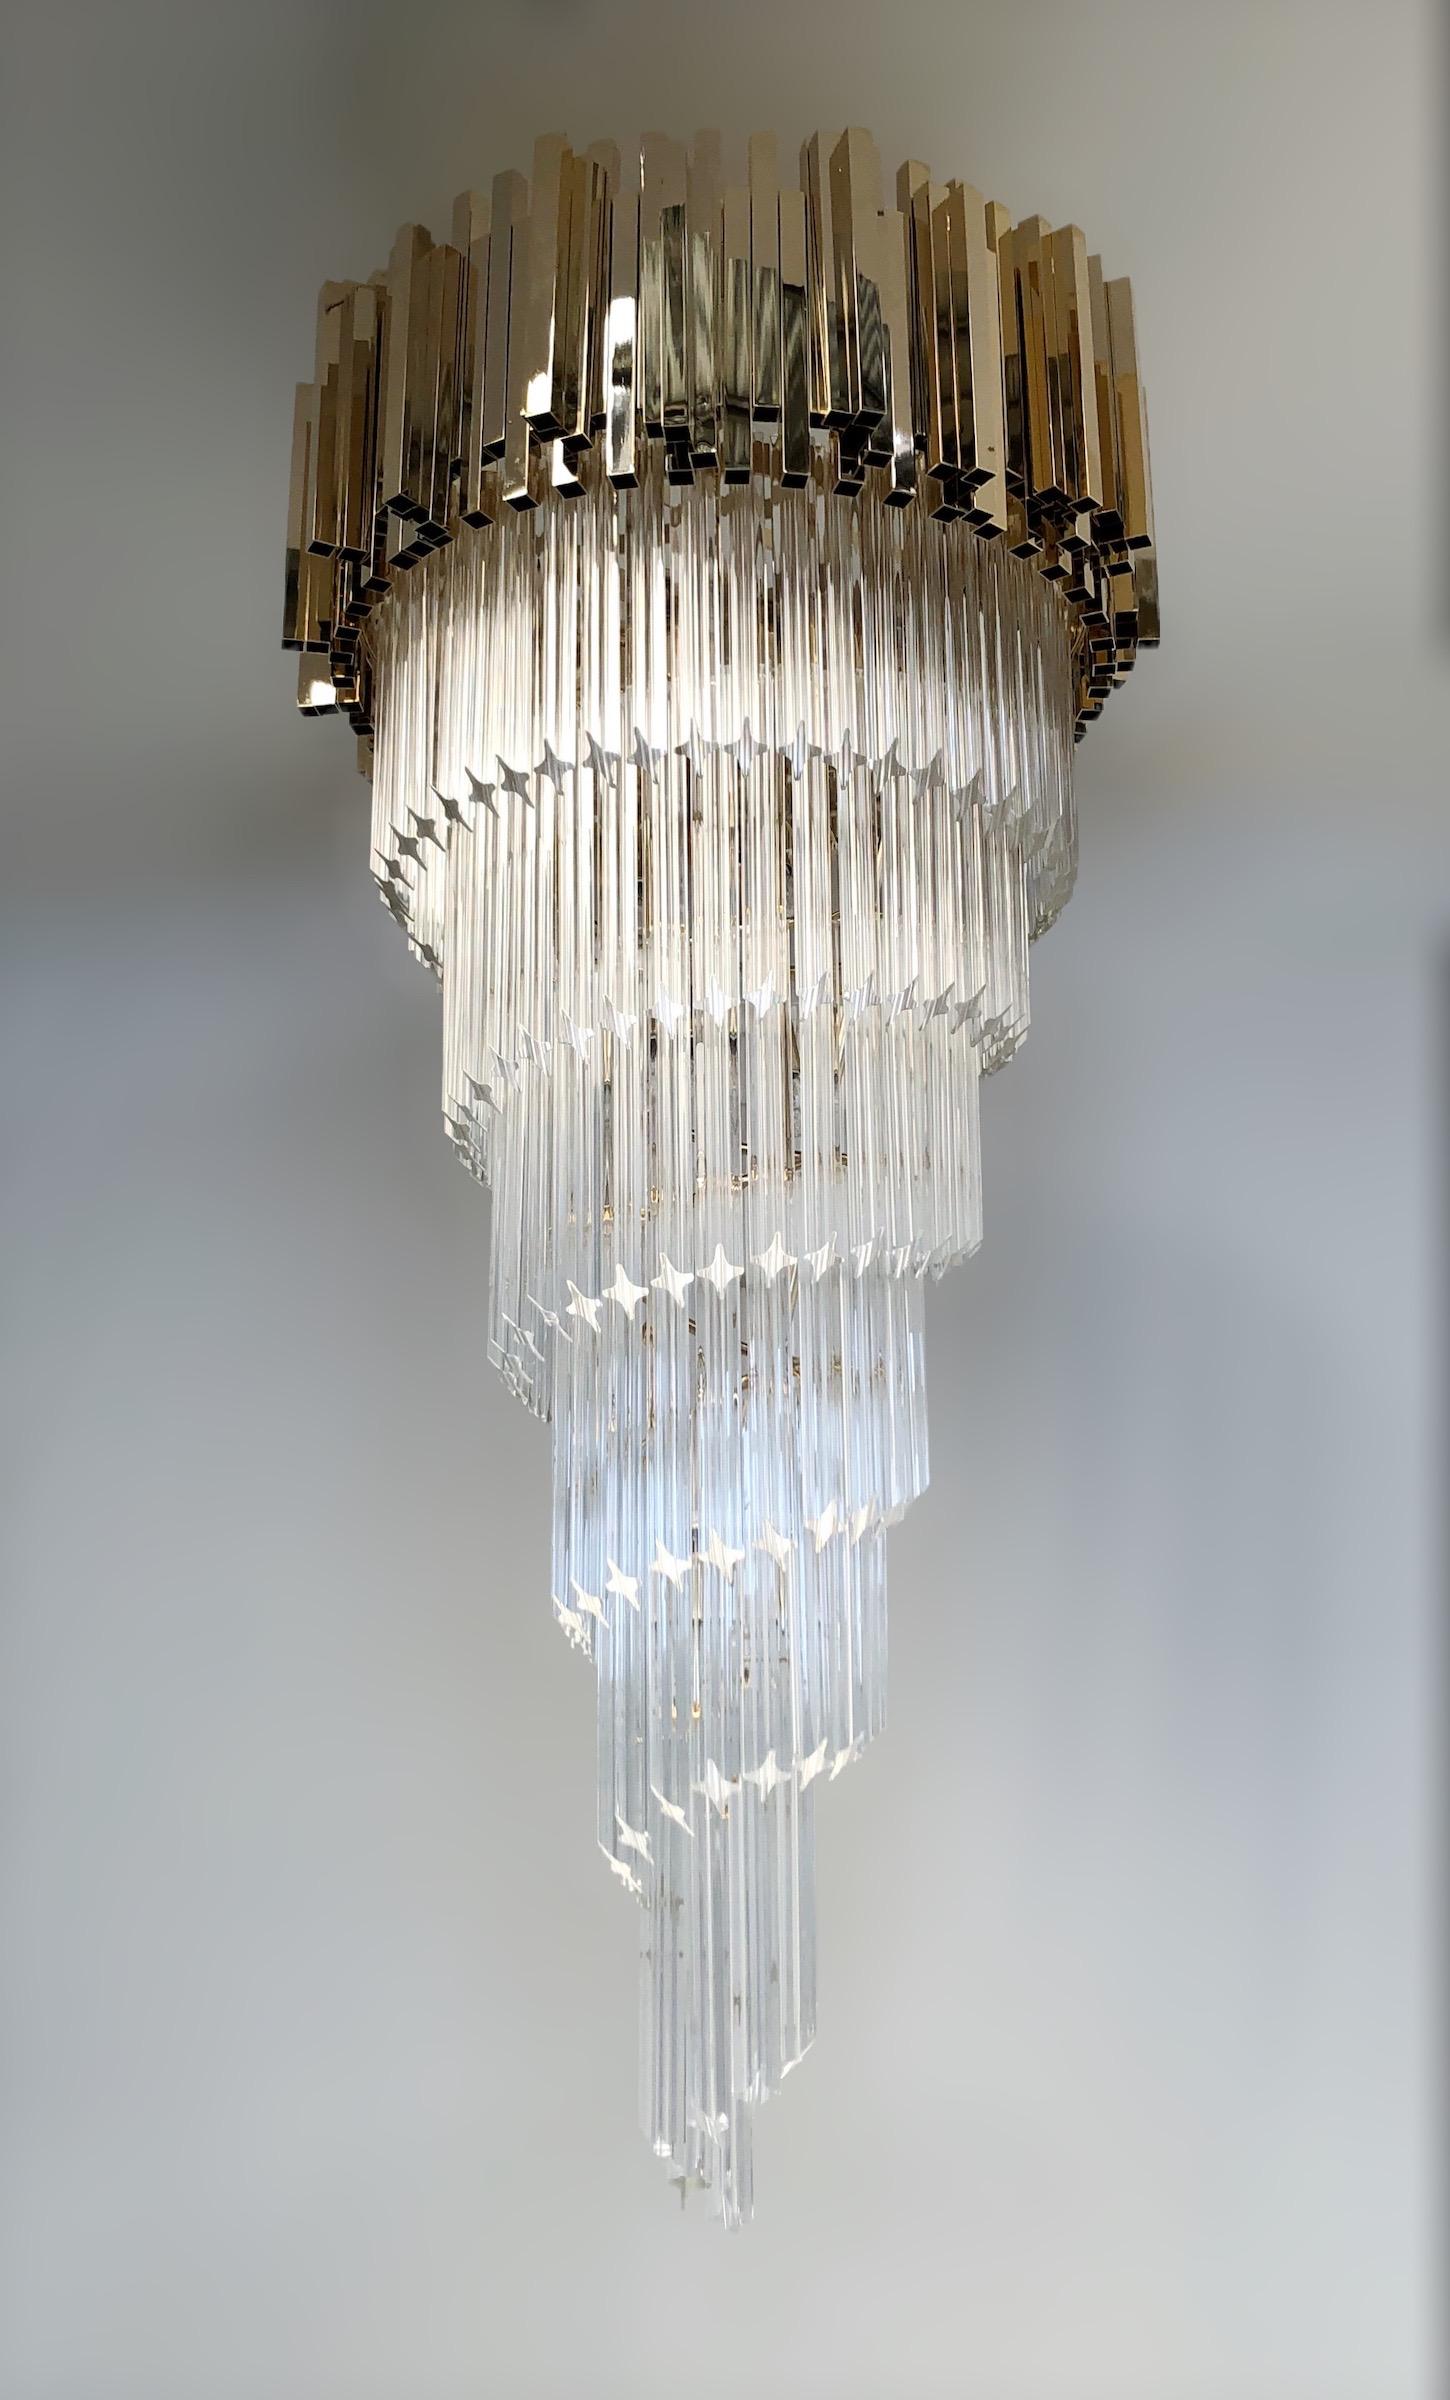 Italian spiral chandelier shown in clear Murano glasses cut into four points using Quadriedri technique with a hand crafted geometric crown on top in light gold metal finish by Fabio Ltd / Made in Italy
12 lights / E12 or E14 type / max 40W